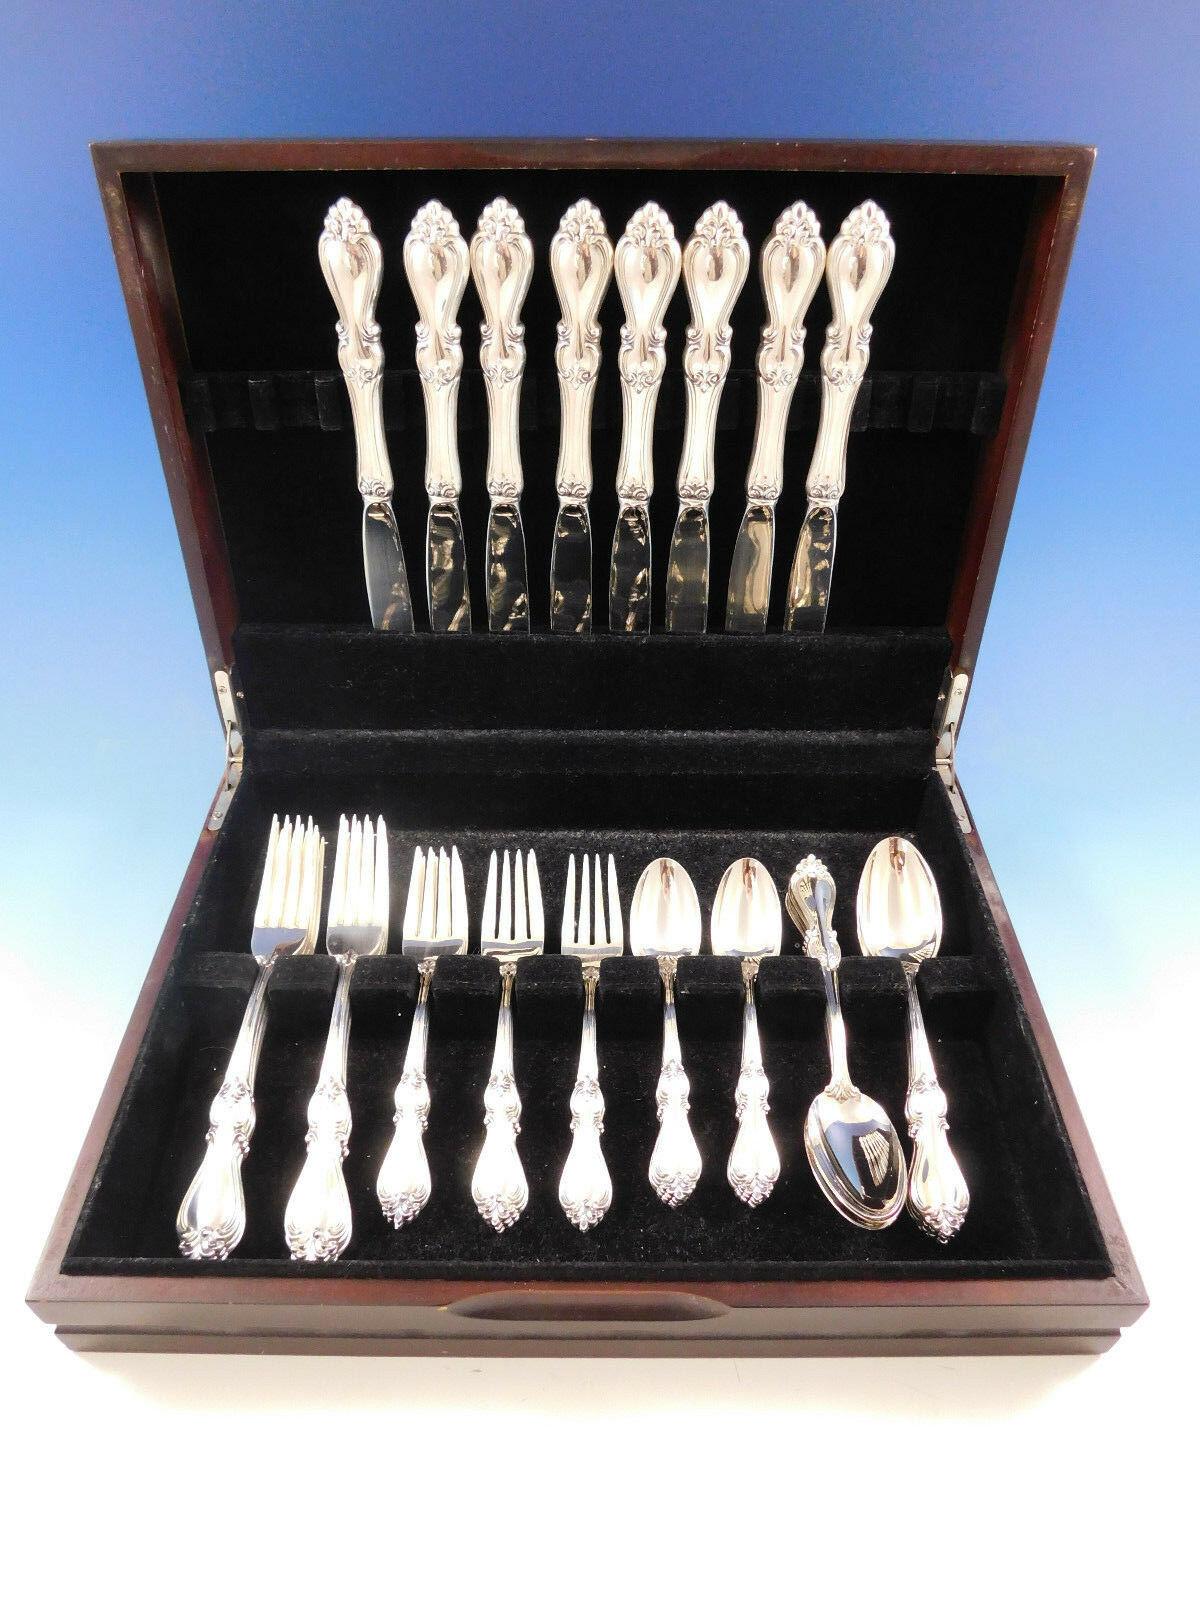 Dinner size Queen Elizabeth I by Towle sterling silver flatware set, 40 pieces. This set includes:

8 dinner size knives, 9 5/8